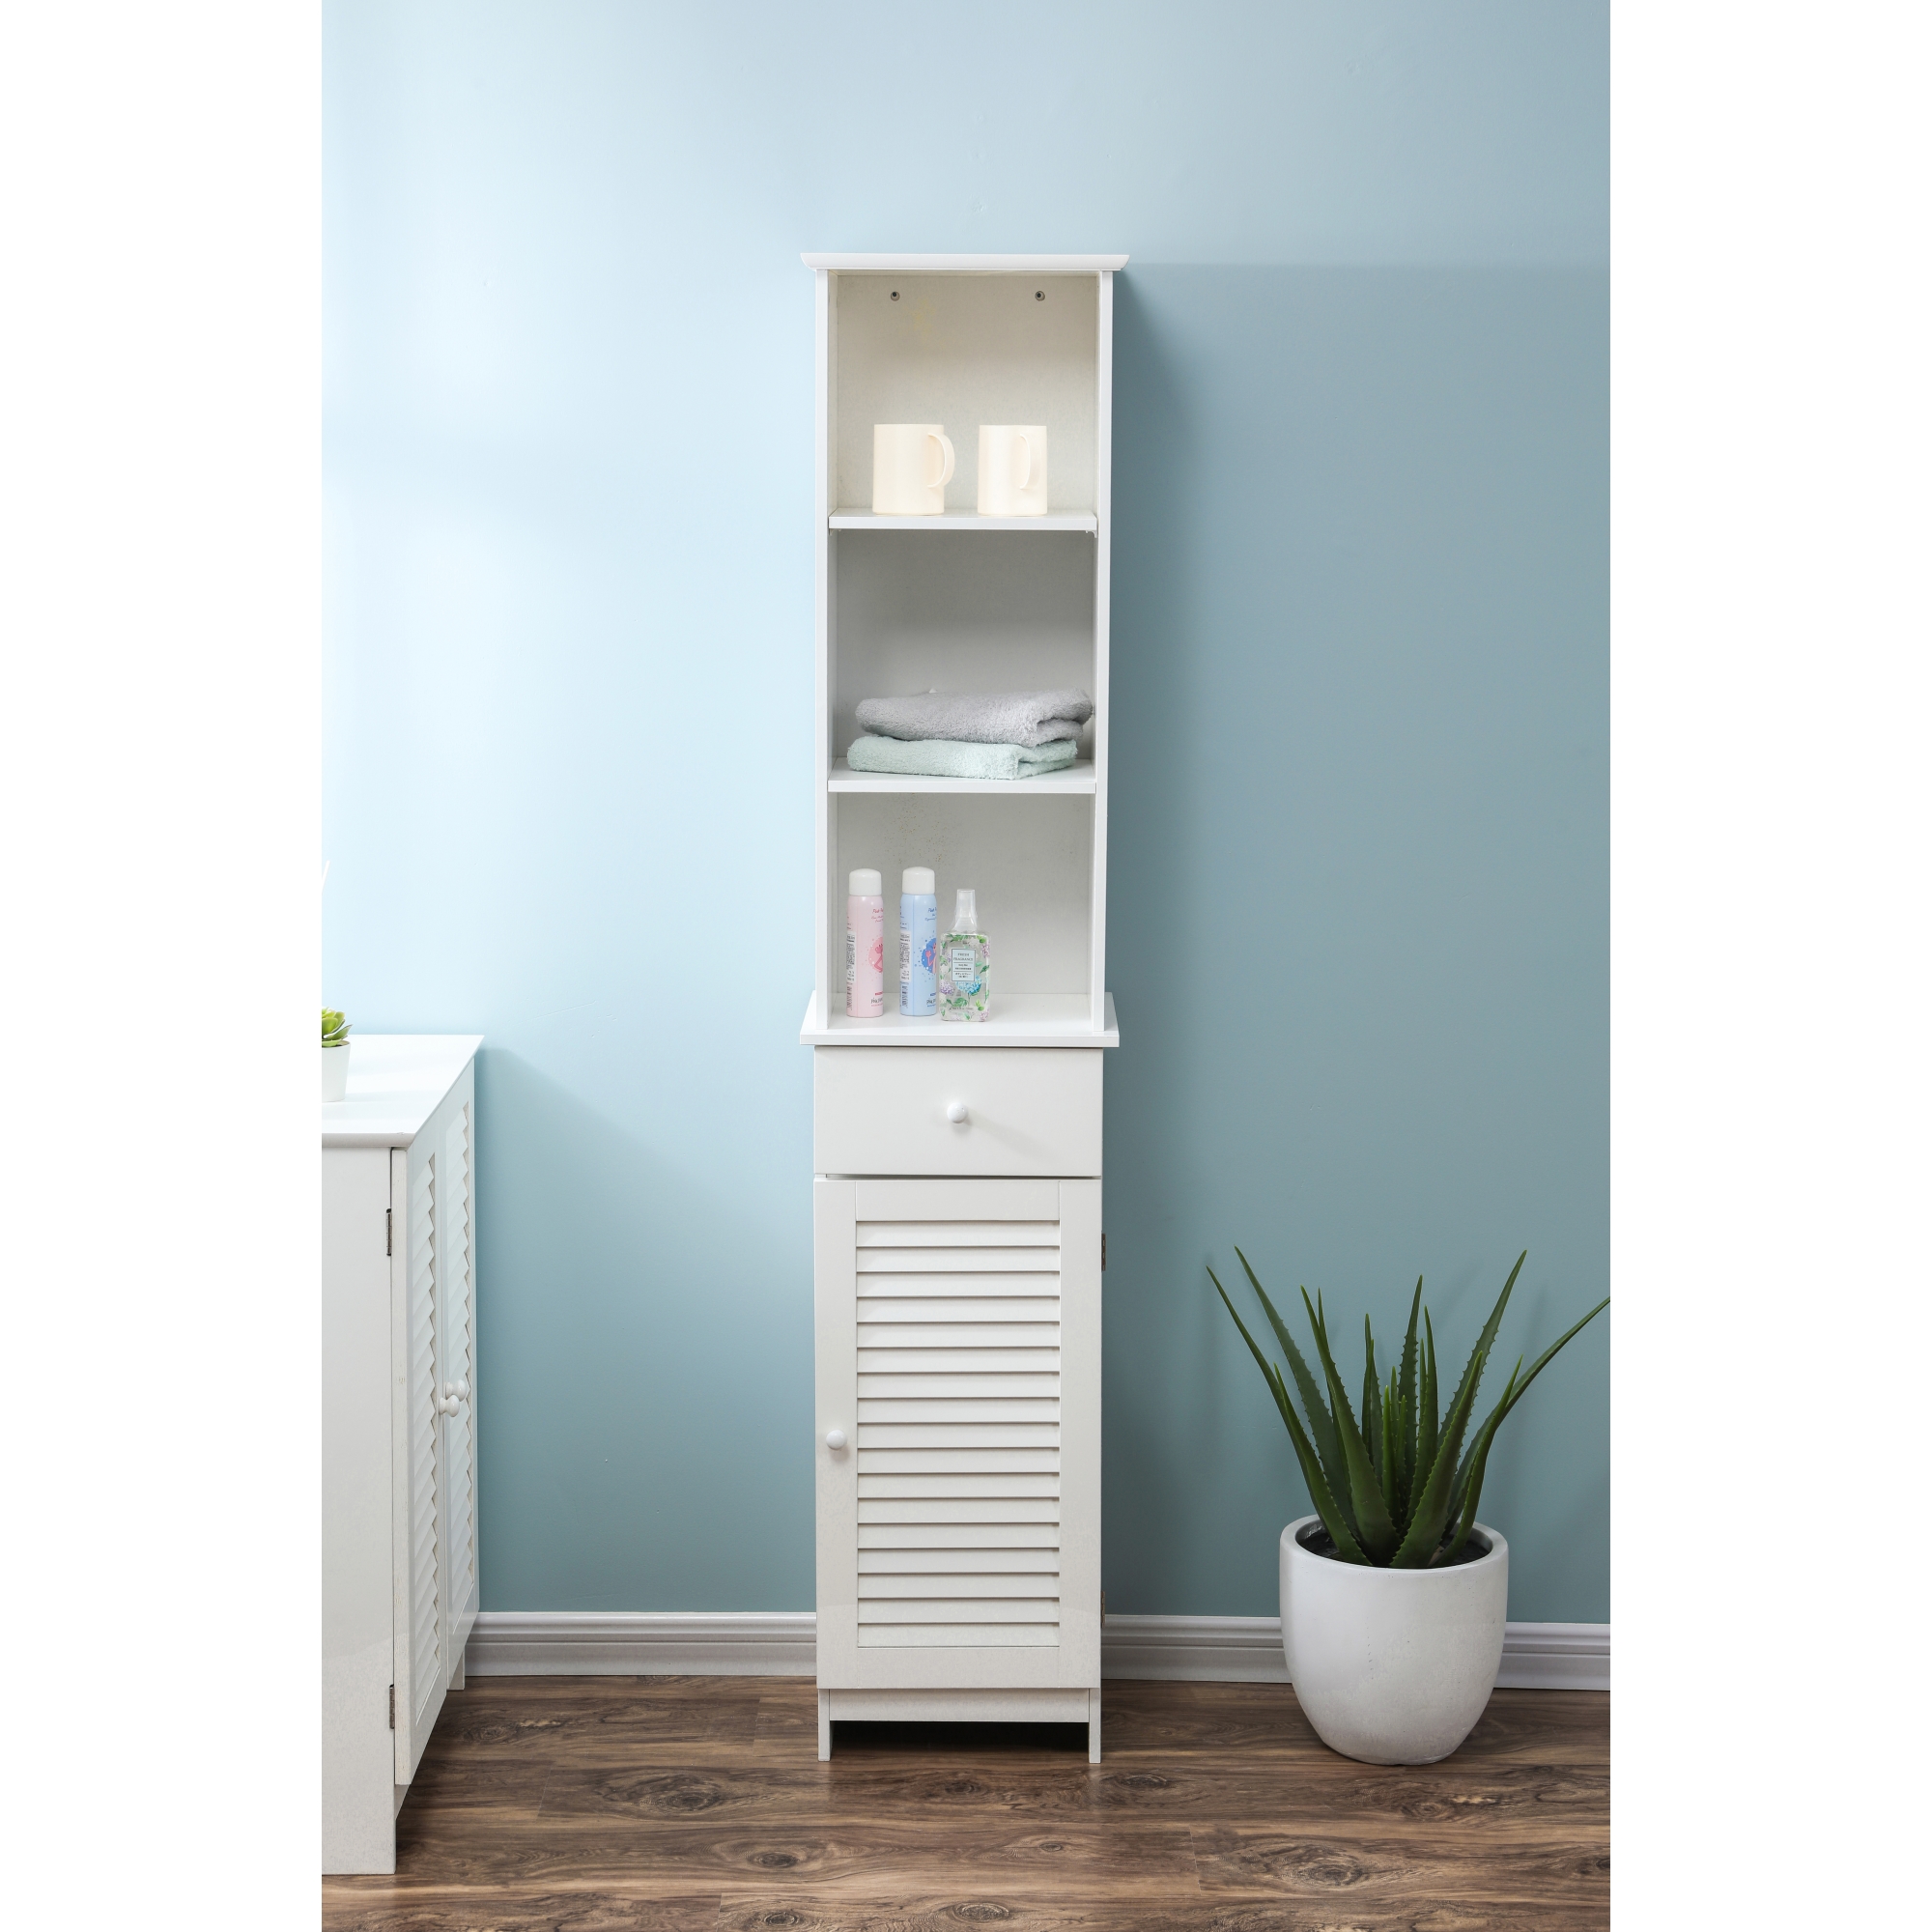 Whif631 64.2 In. Shutter-door Bathroom Tall Cabinet, White